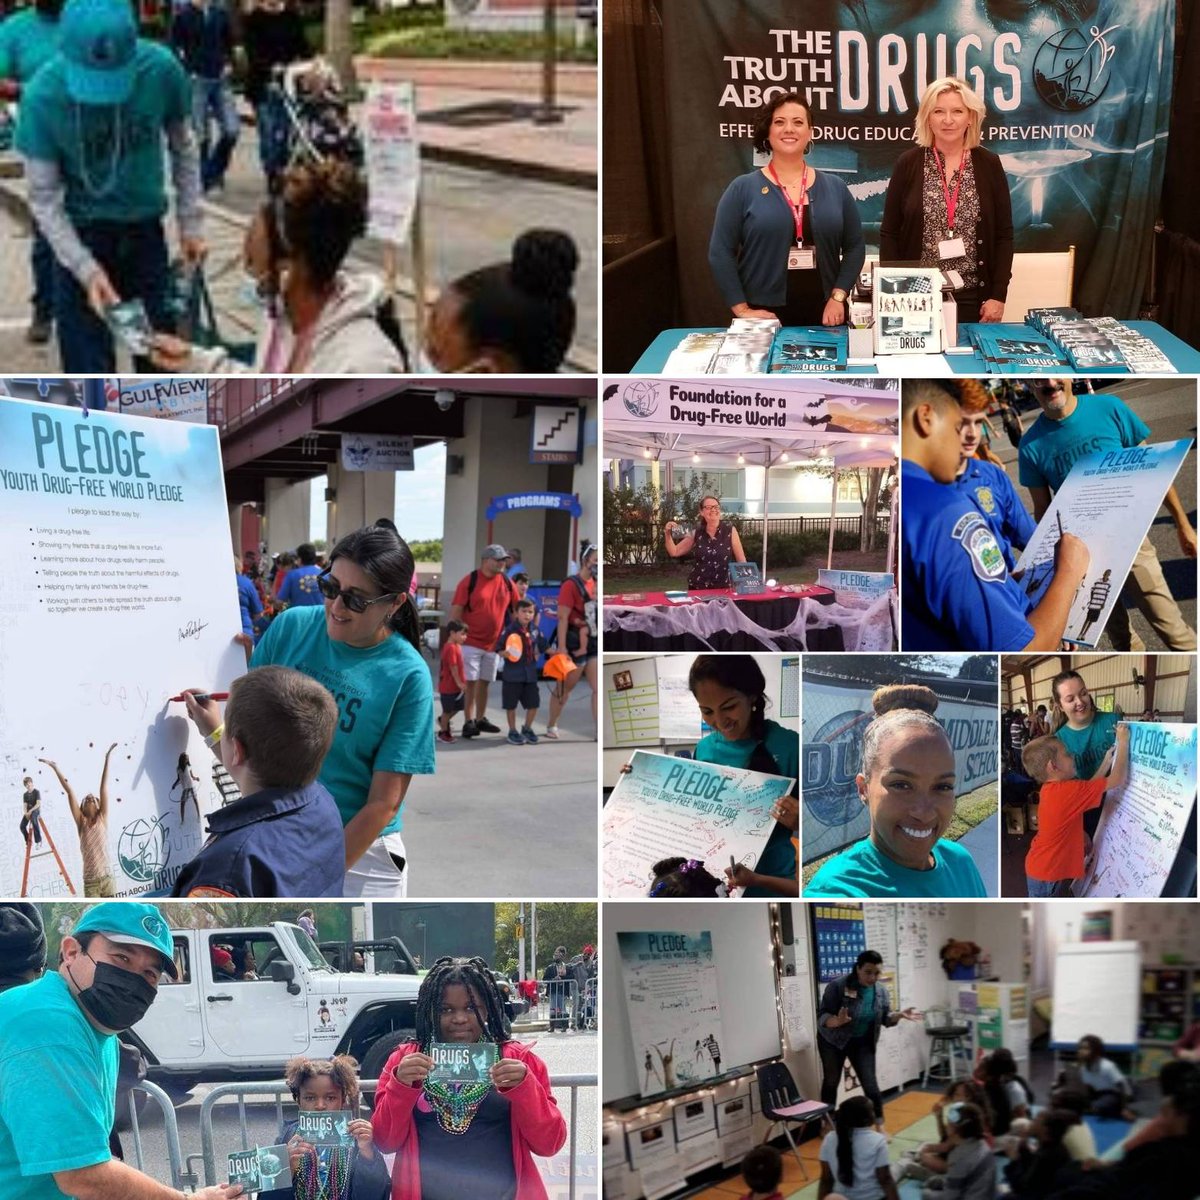 We love our amazing voluteers, it takes a village to help create a safer better future
.
#truthaboutdrugs #knowledgeispower #bethechange #makeadiffrence #helping #volunteer #healthyliving #overdoseprevention #opioidepidemic #Hillsborough #pinellas #broward #tampabay